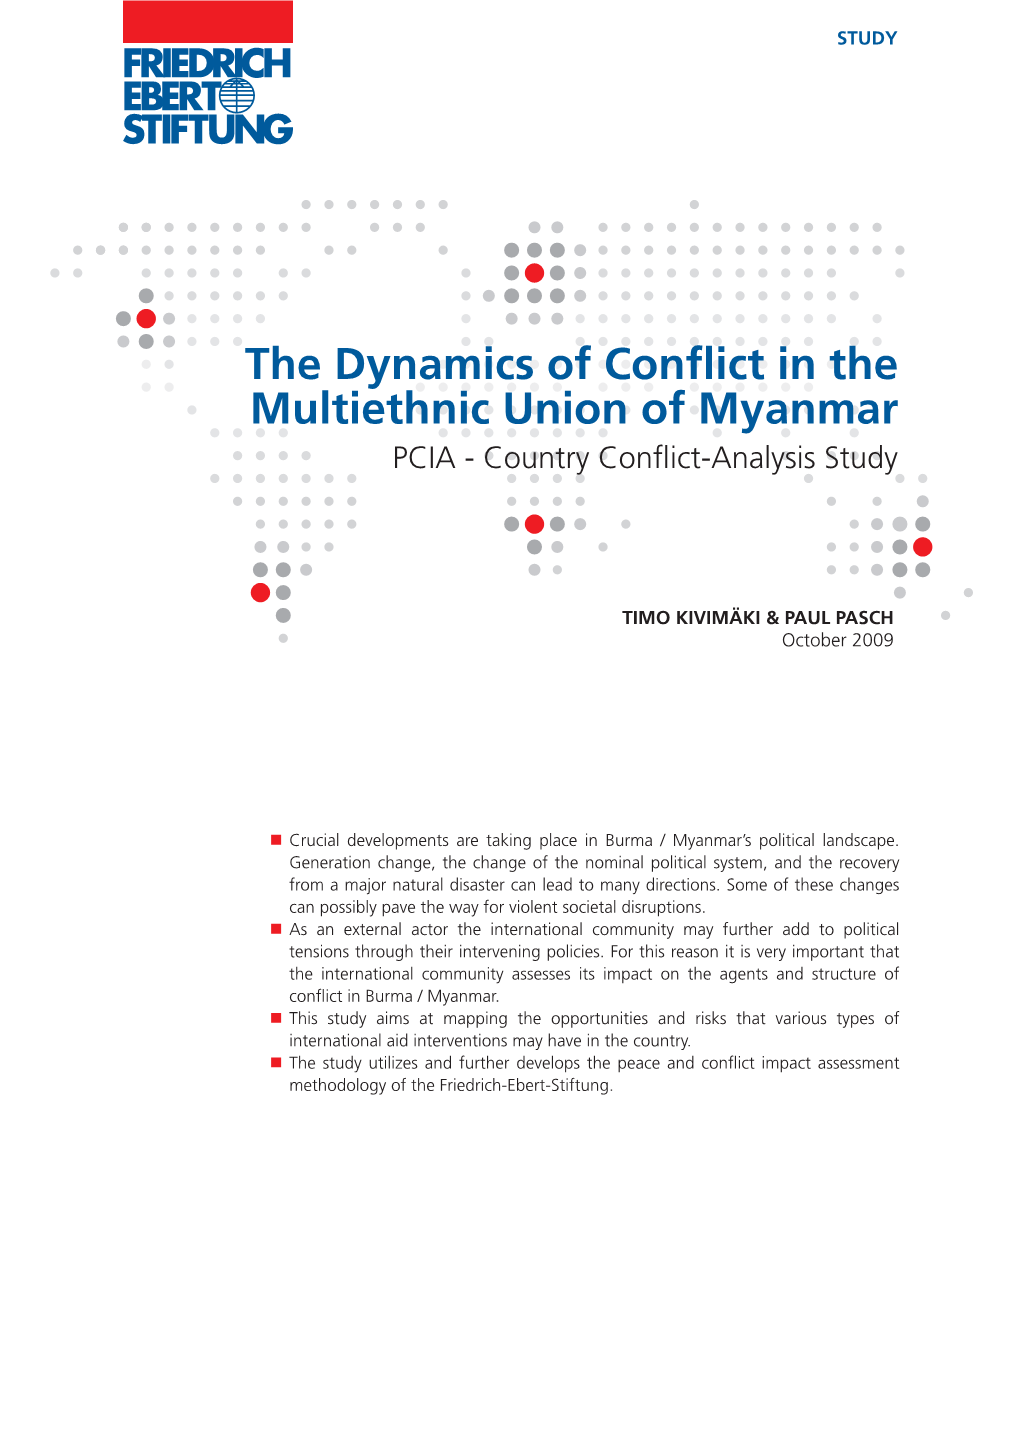 The Dynamics of Conflict in the Multiethnic Union of Myanmar PCIA - Country Conflict-Analysis Study